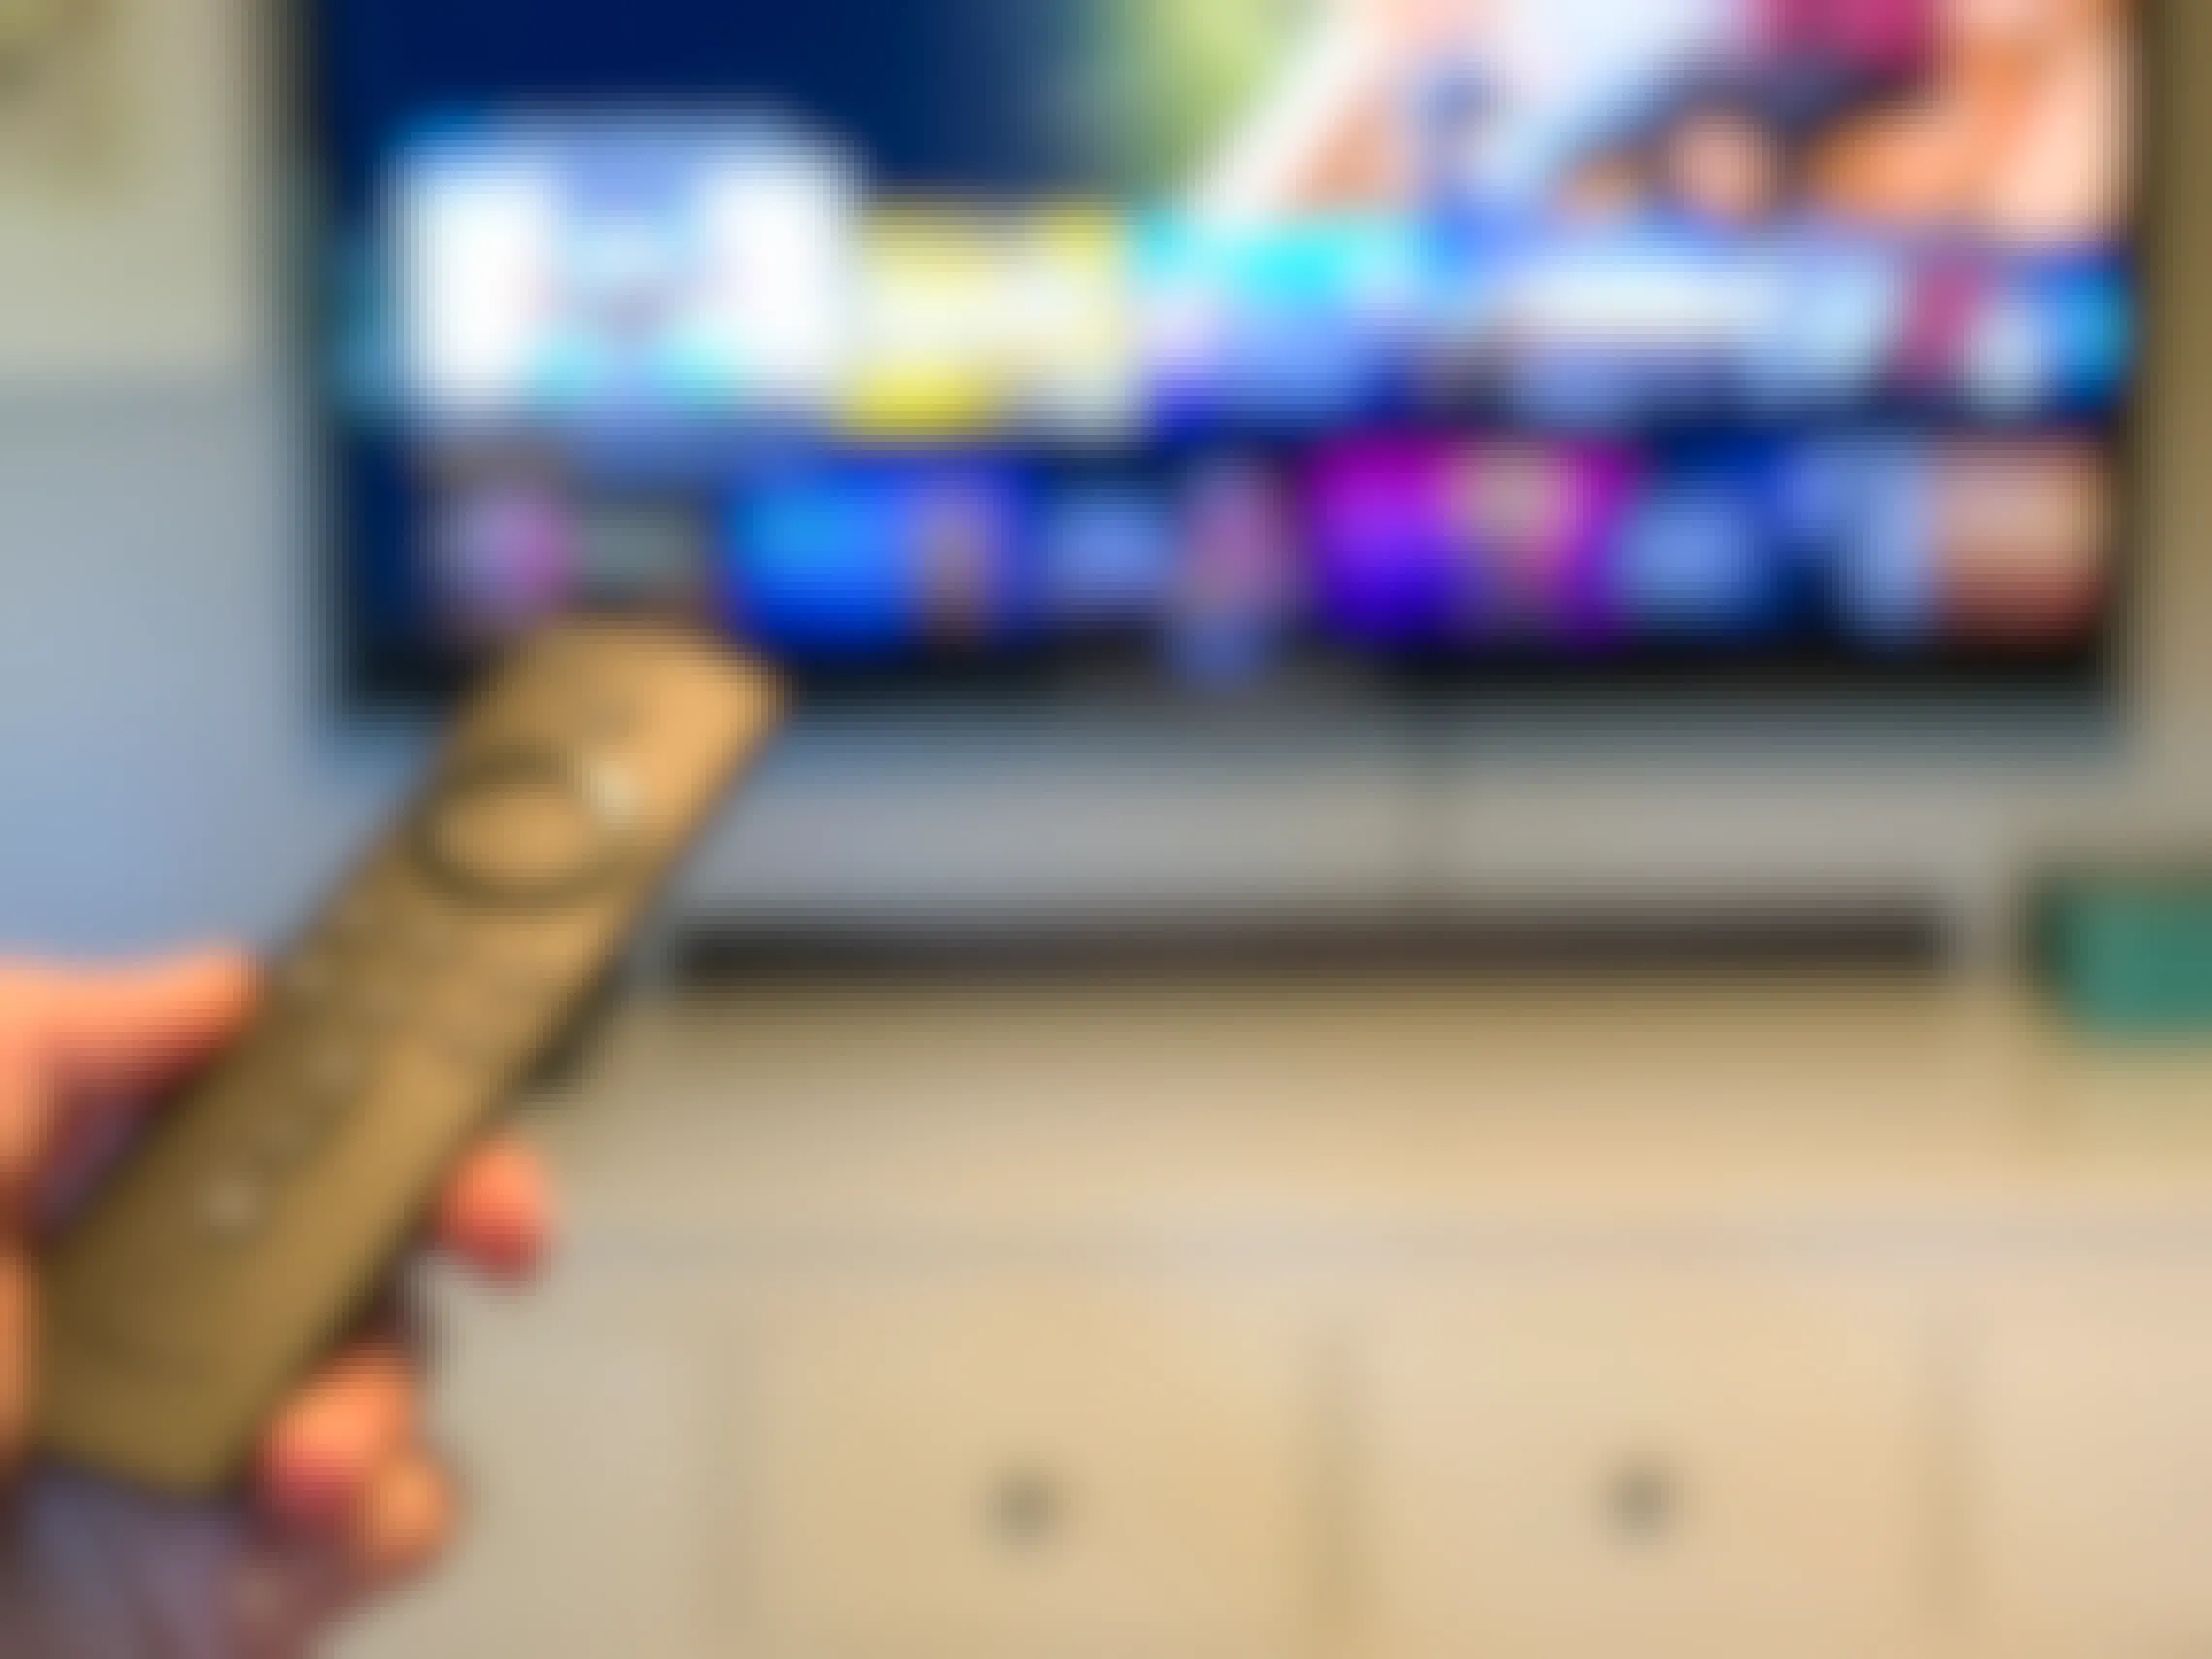 Amazon fire tv stick pointed at a tv with programs out of focus in the background.